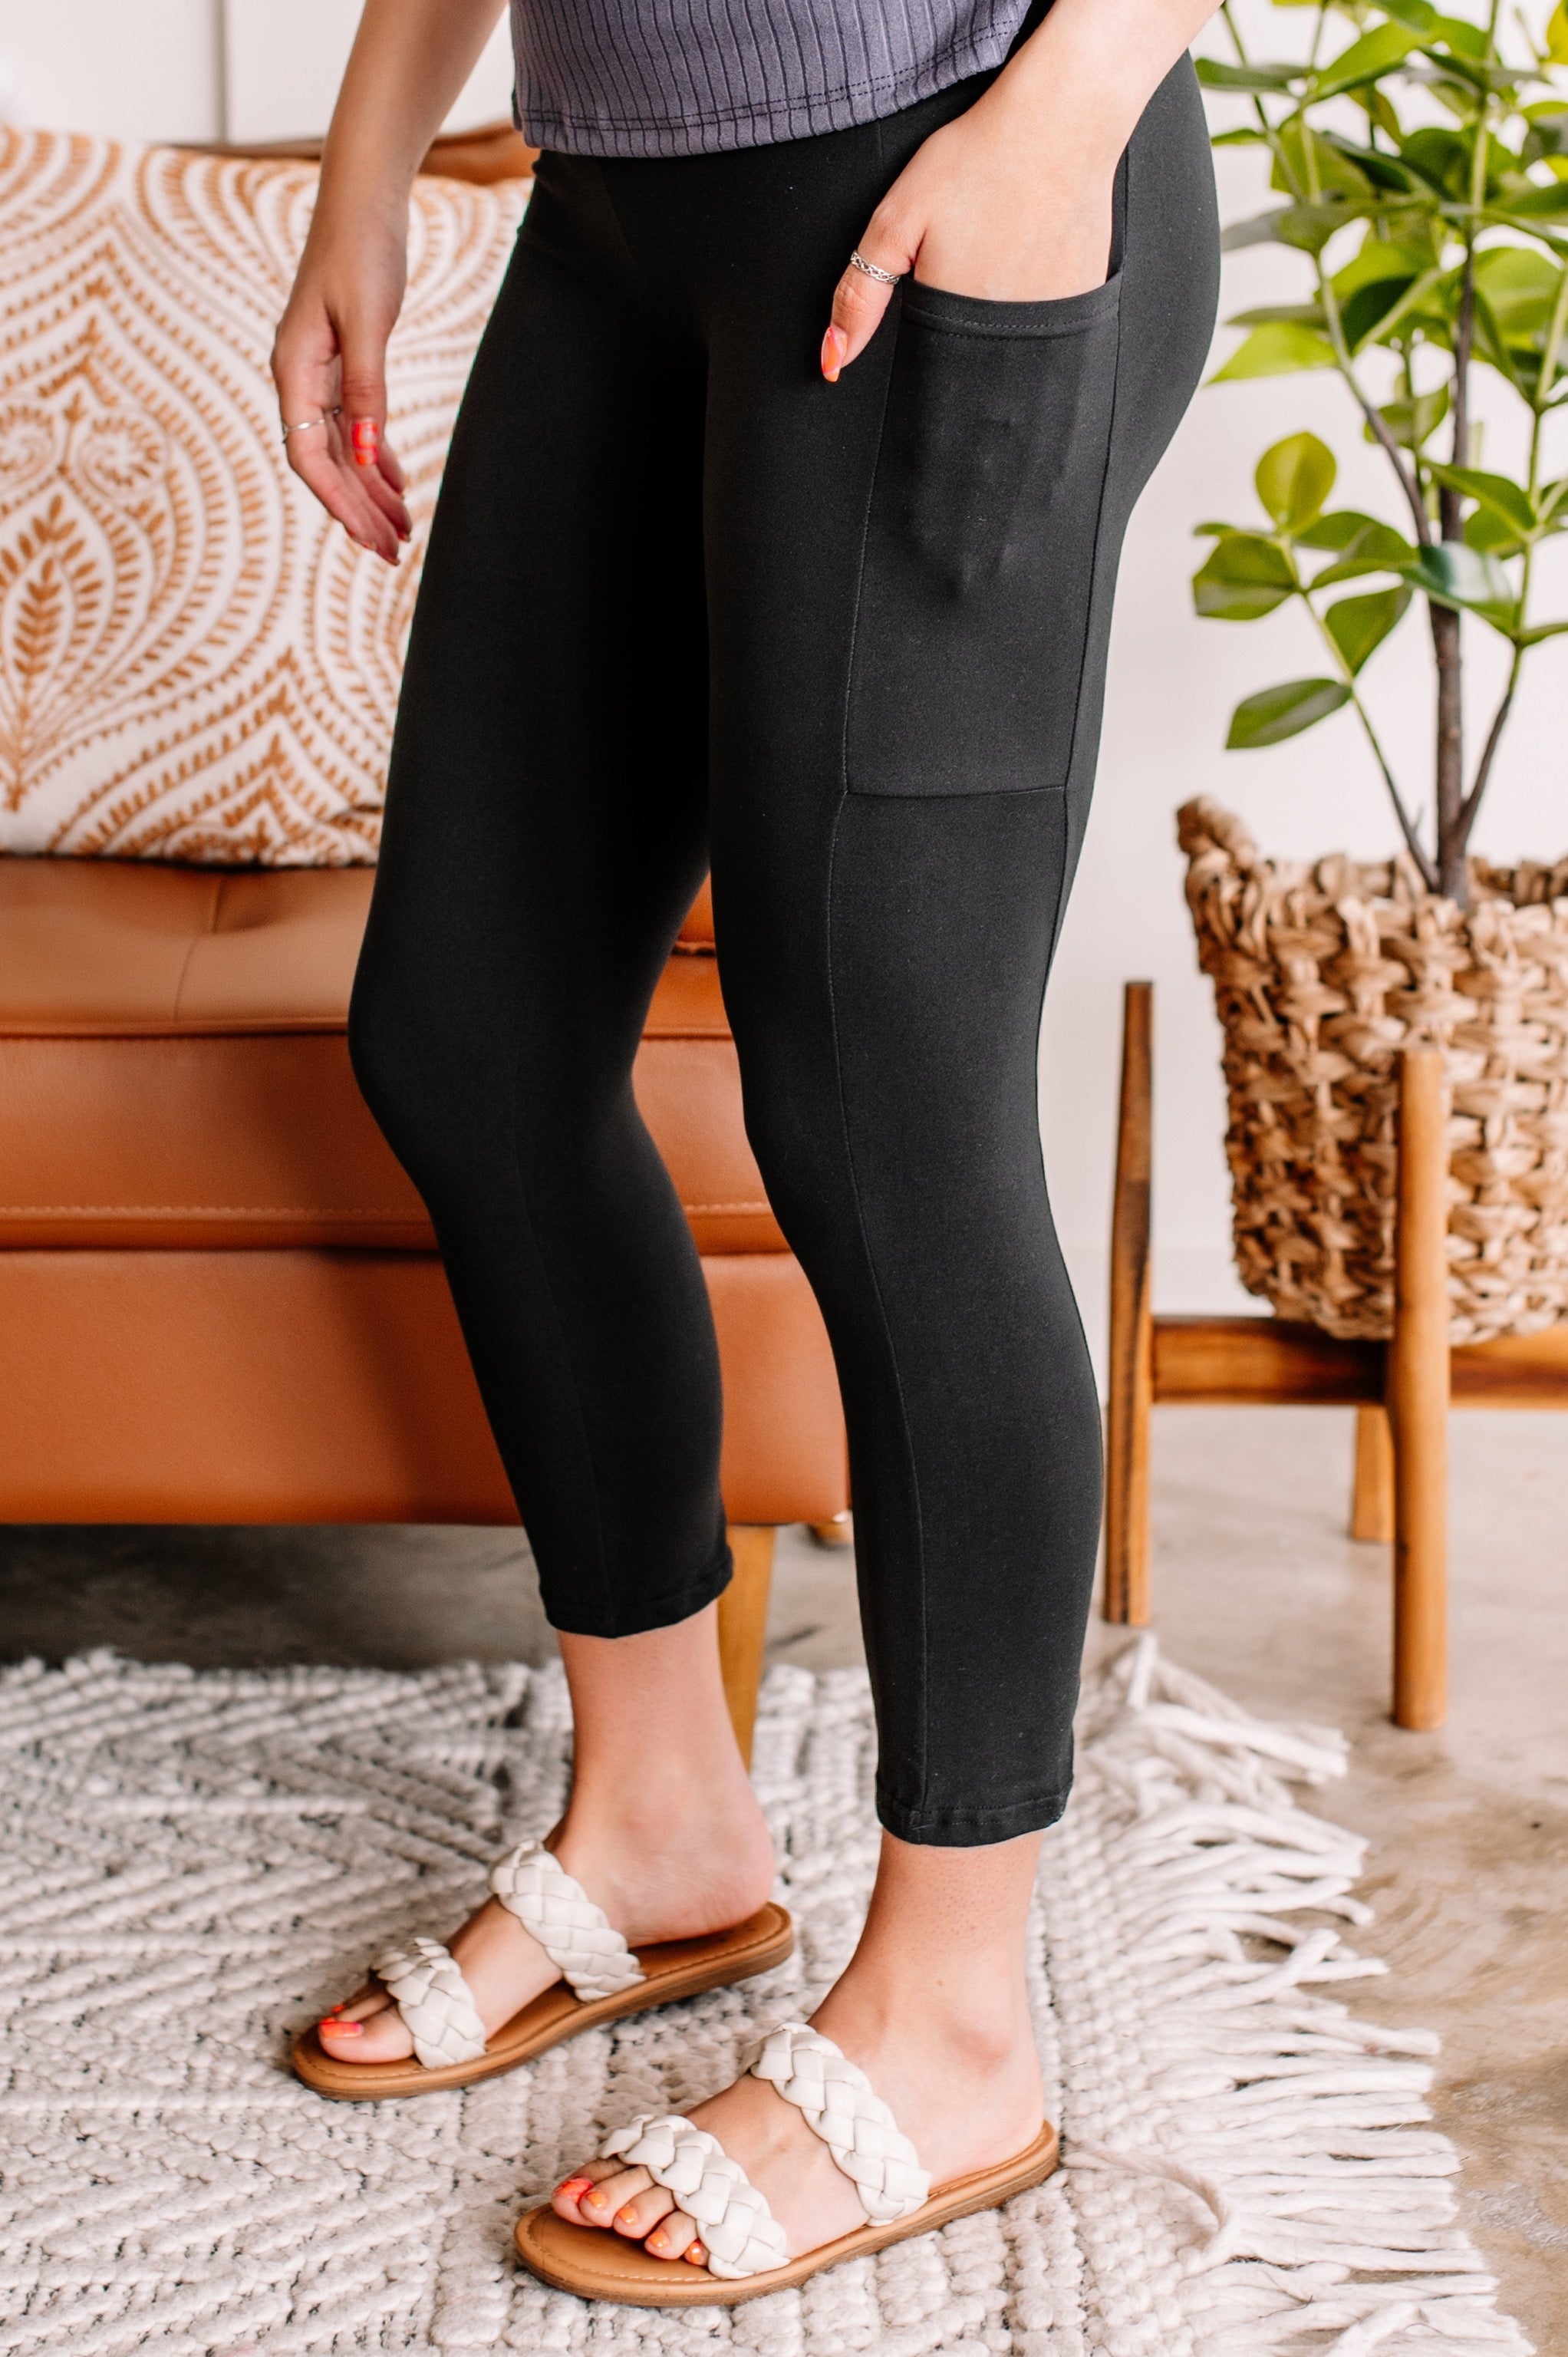 The Last Capri Leggings You'll Ever Need in Energetic Black (with pockets!)